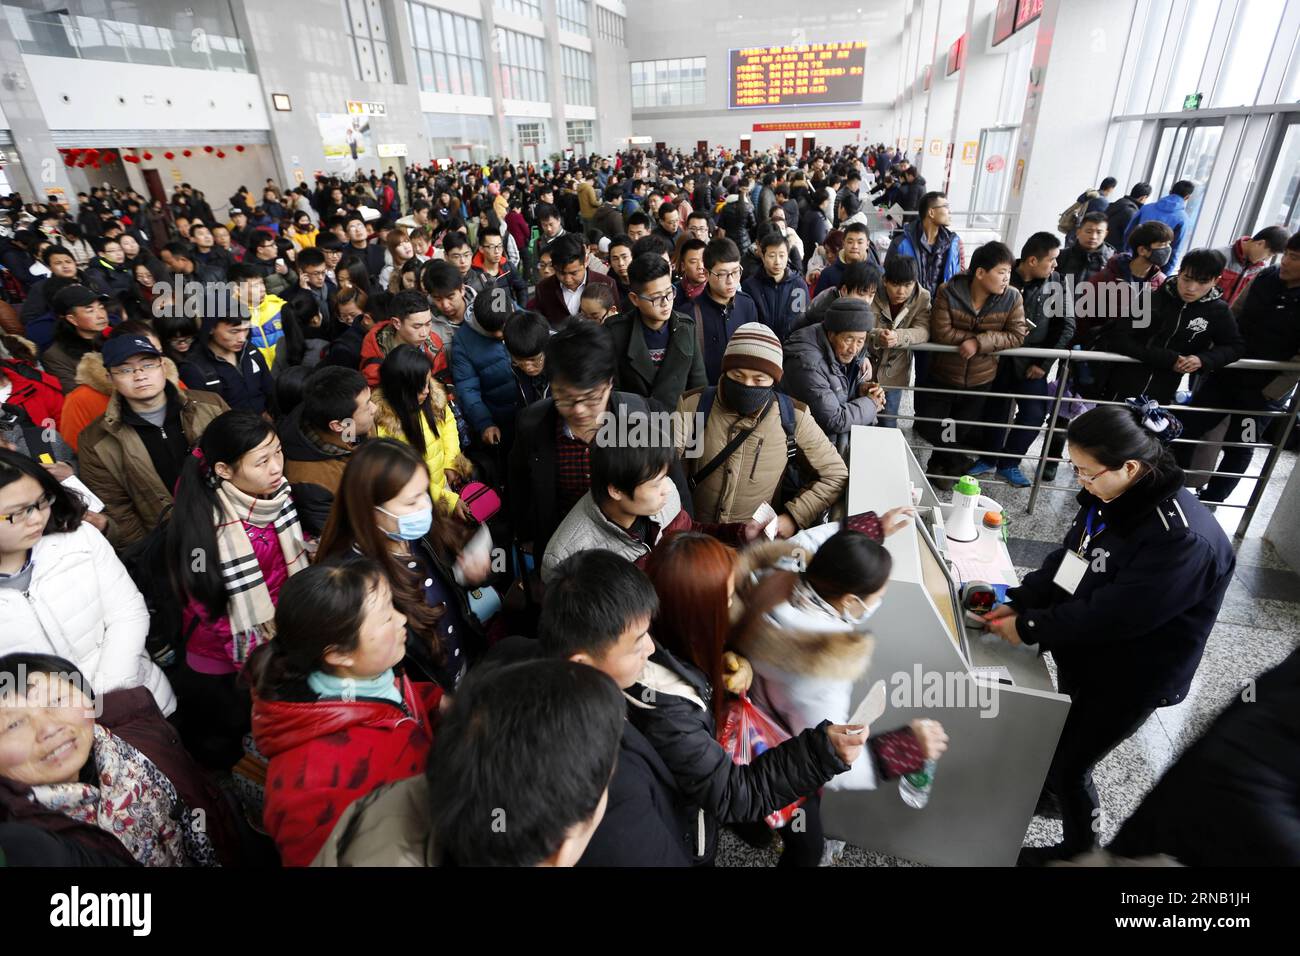 LIANYUNGANG  Passengers prepare to have tickets checked at a passenger station in Lianyungang, east China s Jiangsu Province, Feb. 13, 2016. Chinese passengers made a record number of trips during the Spring Festival holiday, according to the Ministry of Transport (MOT) on Sunday. Passenger trips reached 400 million from Feb. 7 to 13, up 6.7 percent from last year, MOT data showed. Over 47 million trips were made by rail, more than 333 million on road and about 8.5 million by air. Road trips were up by 7 percent. ) (lfj) CHINA-SPRING FESTIVAL HOLIDAY-TRIPS (CN) SixWei PUBLICATIONxNOTxINxCHN Stock Photo